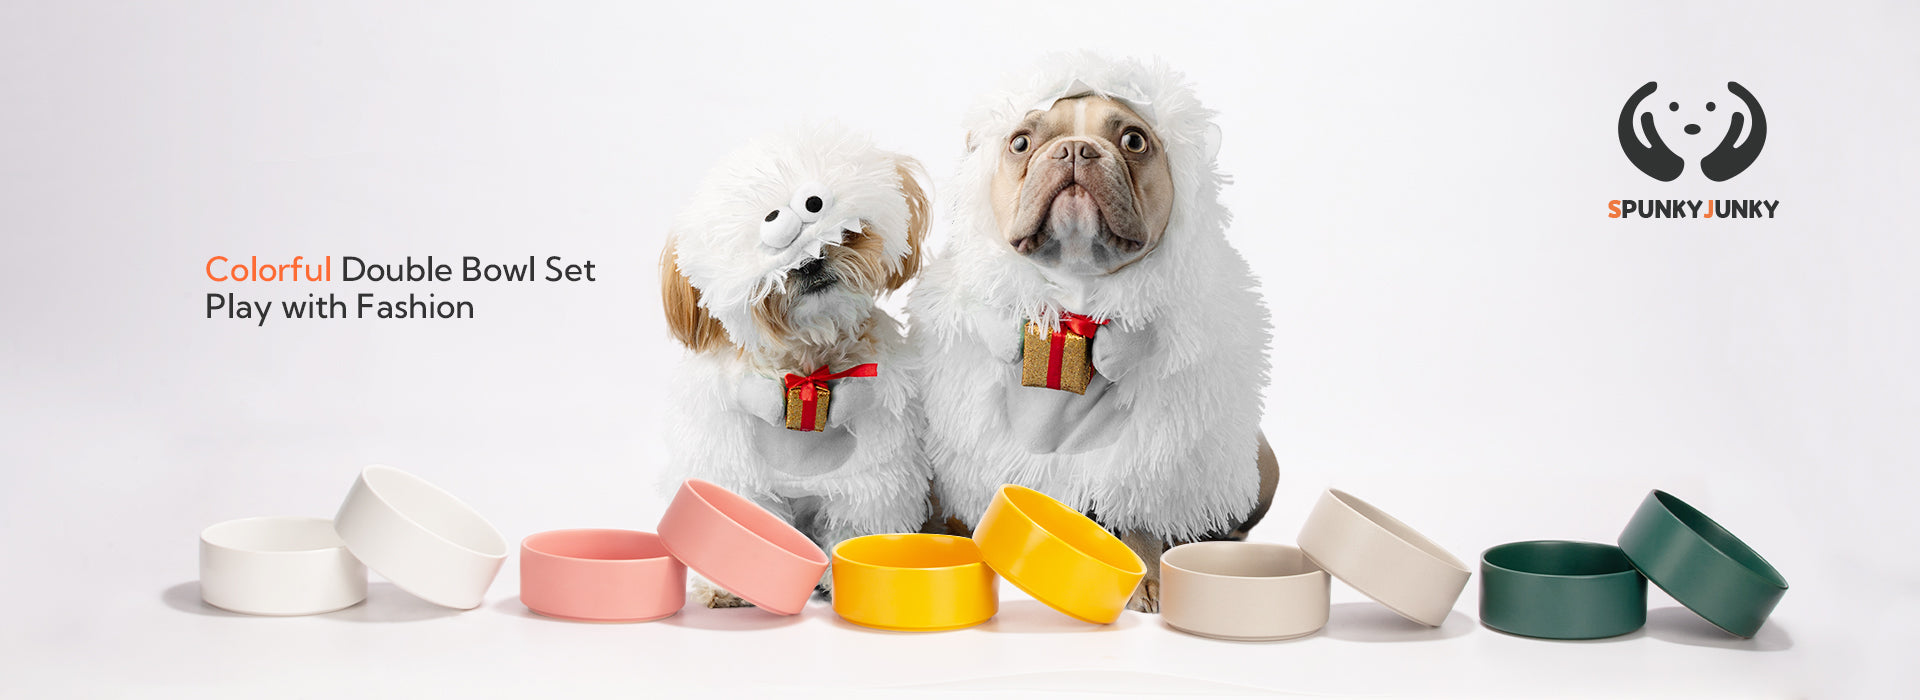 pet bowl sets in 5 colors in front of two impish puppies